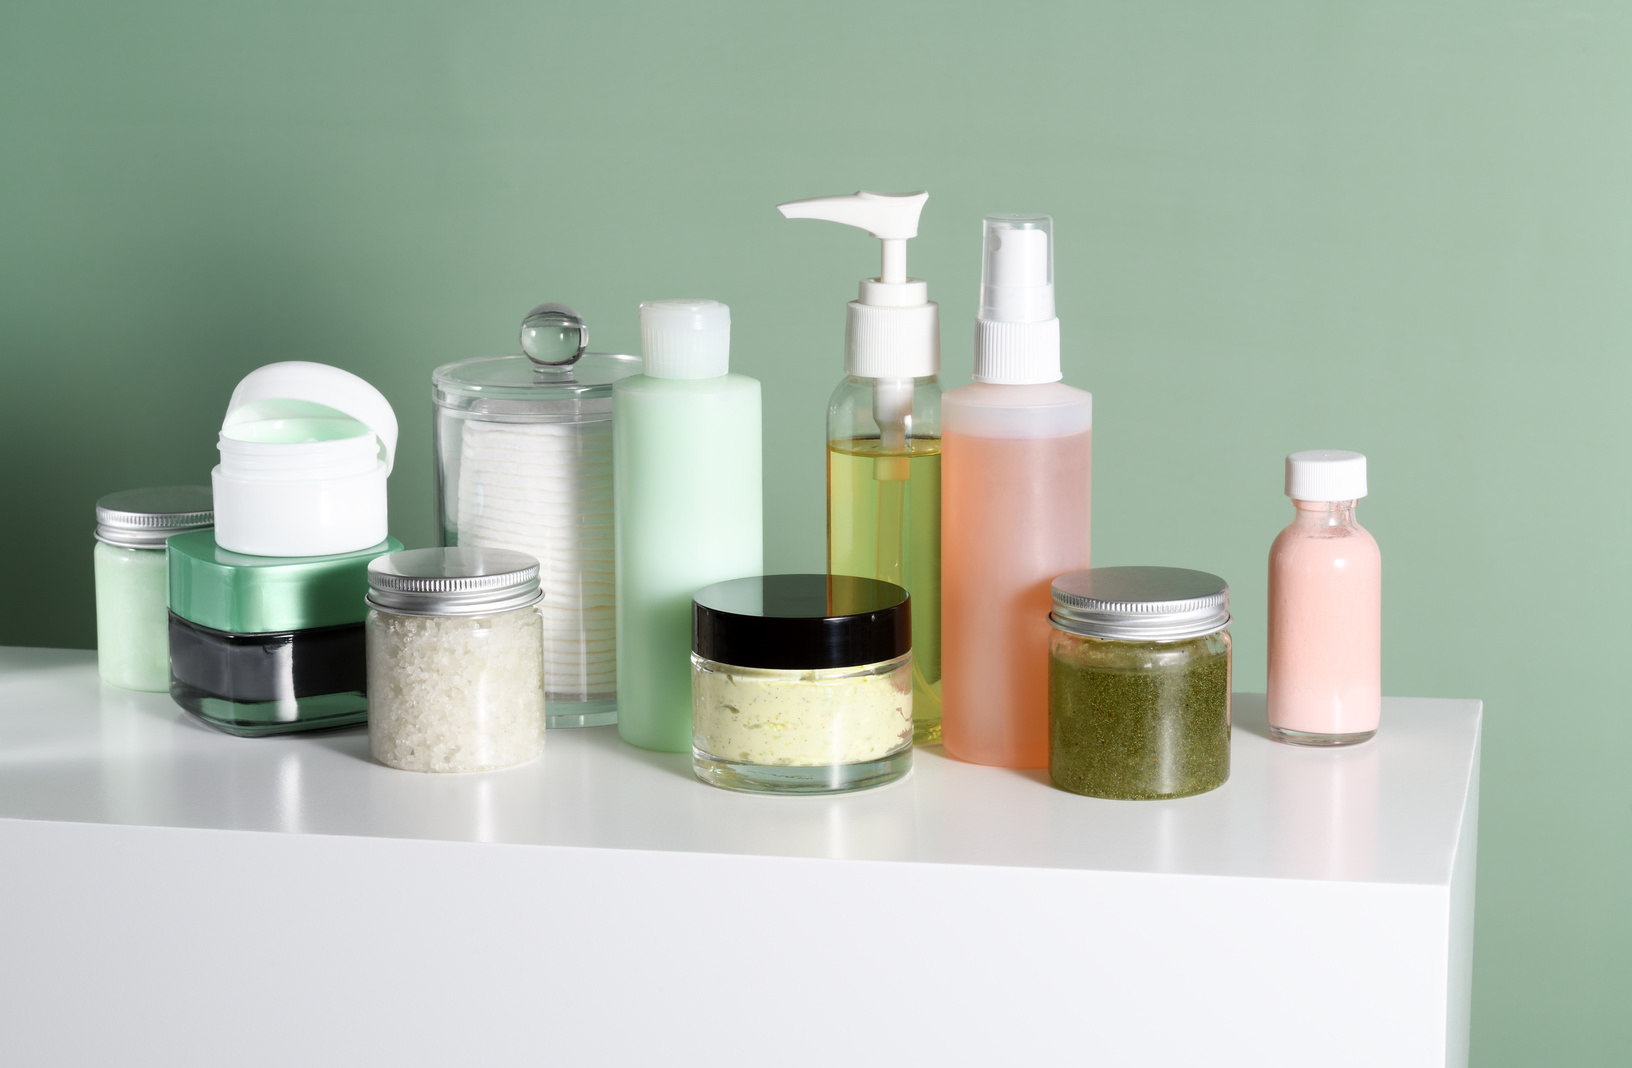 Arrangement of Skin Care Products